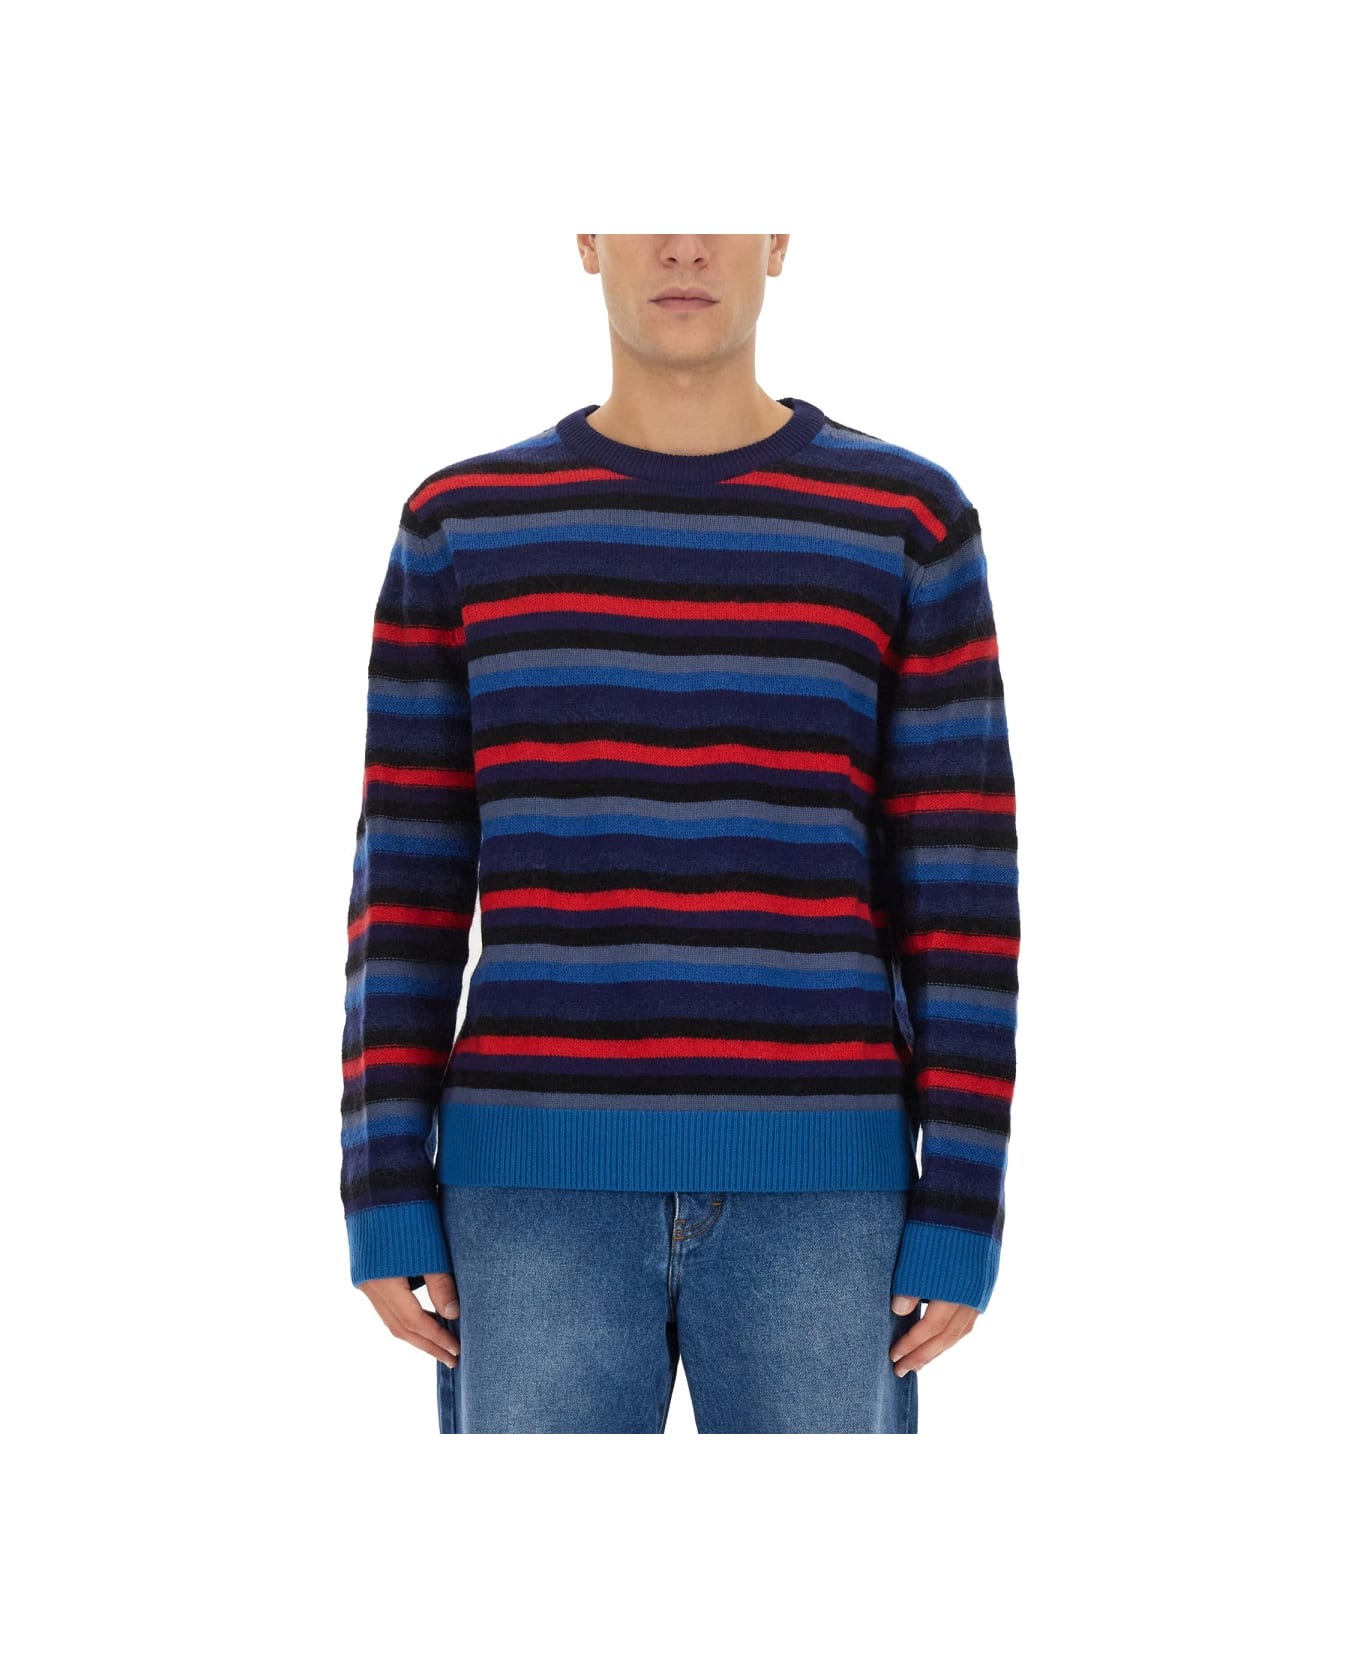 PS by Paul Smith Jersey With Stripe Pattern - BLUE